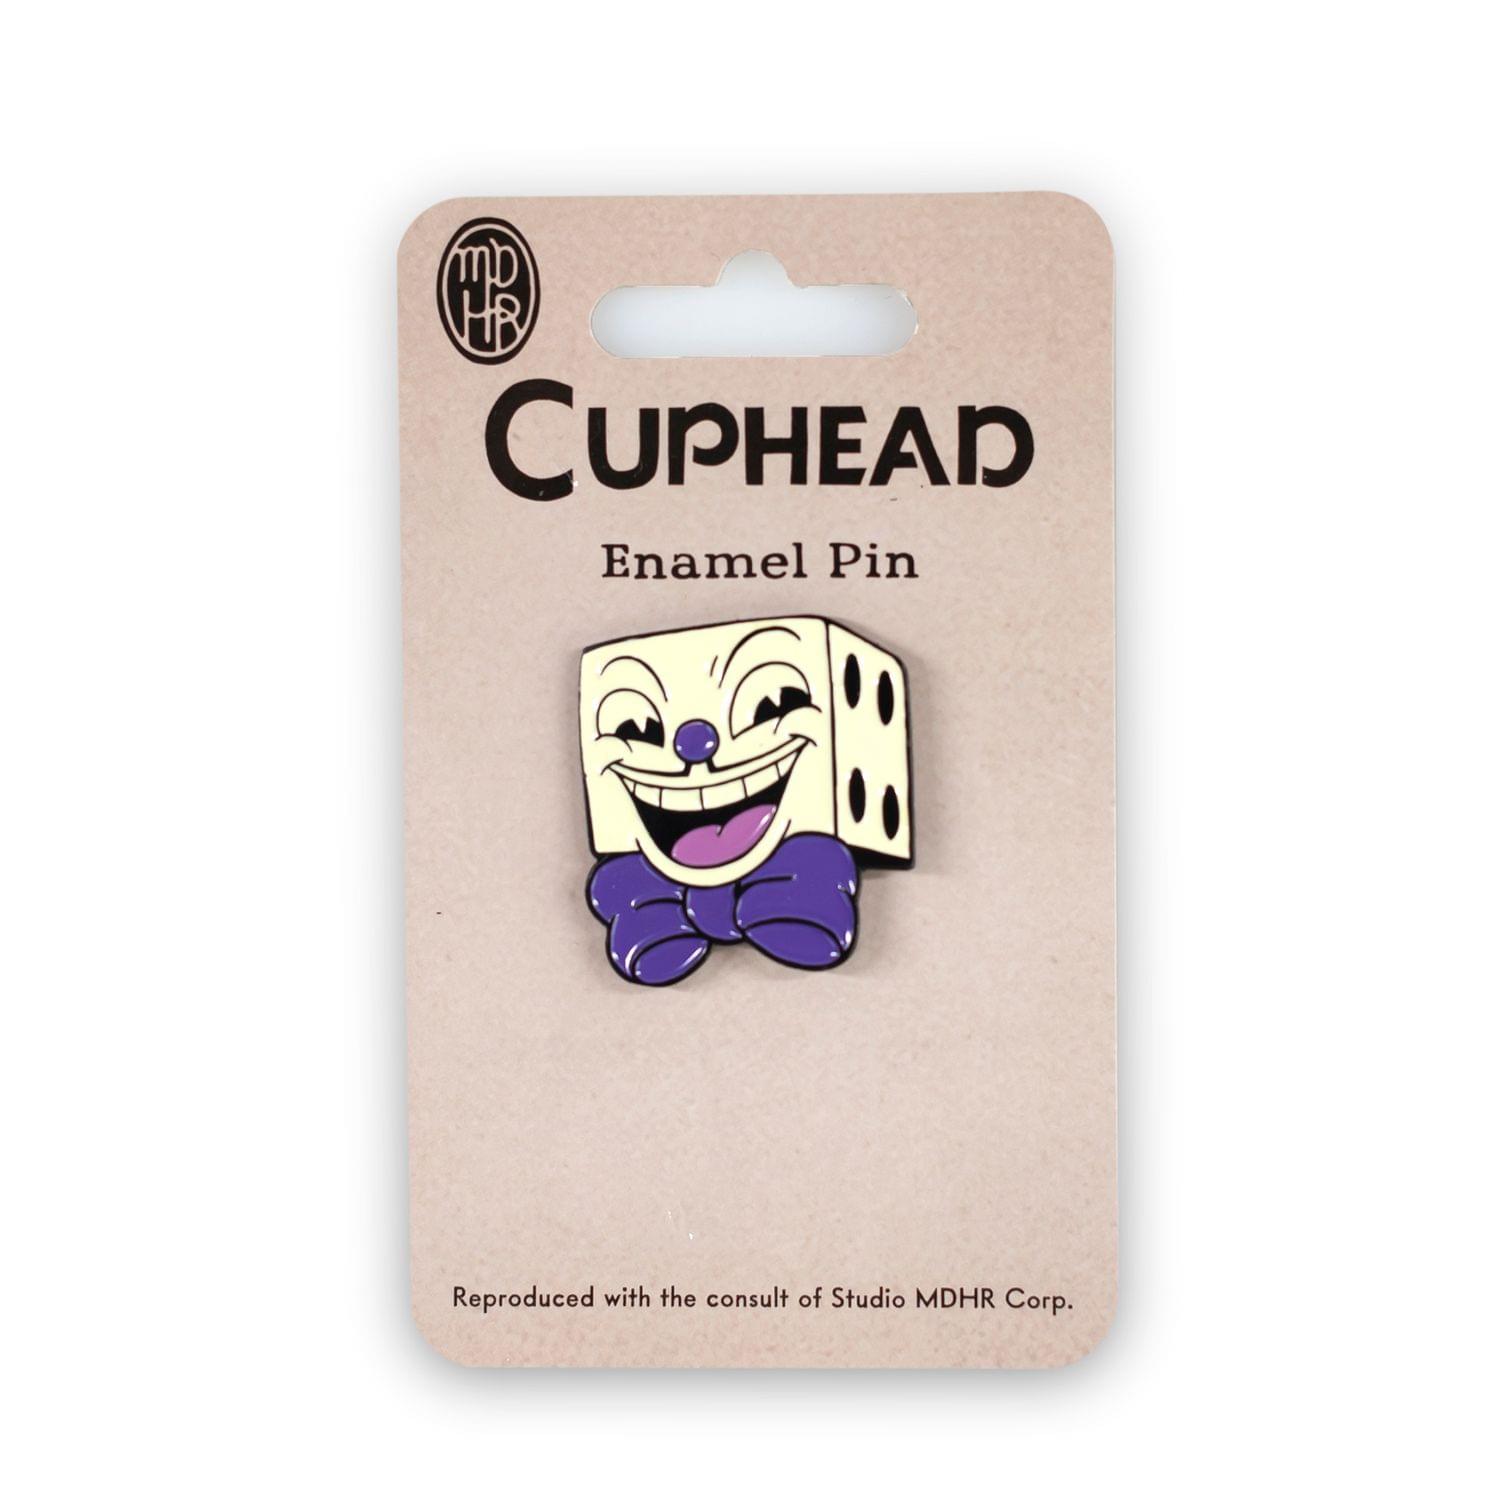 OFFICIAL Cuphead King Dice Enamel Collector Pin | Perfect for Cuphead Fans